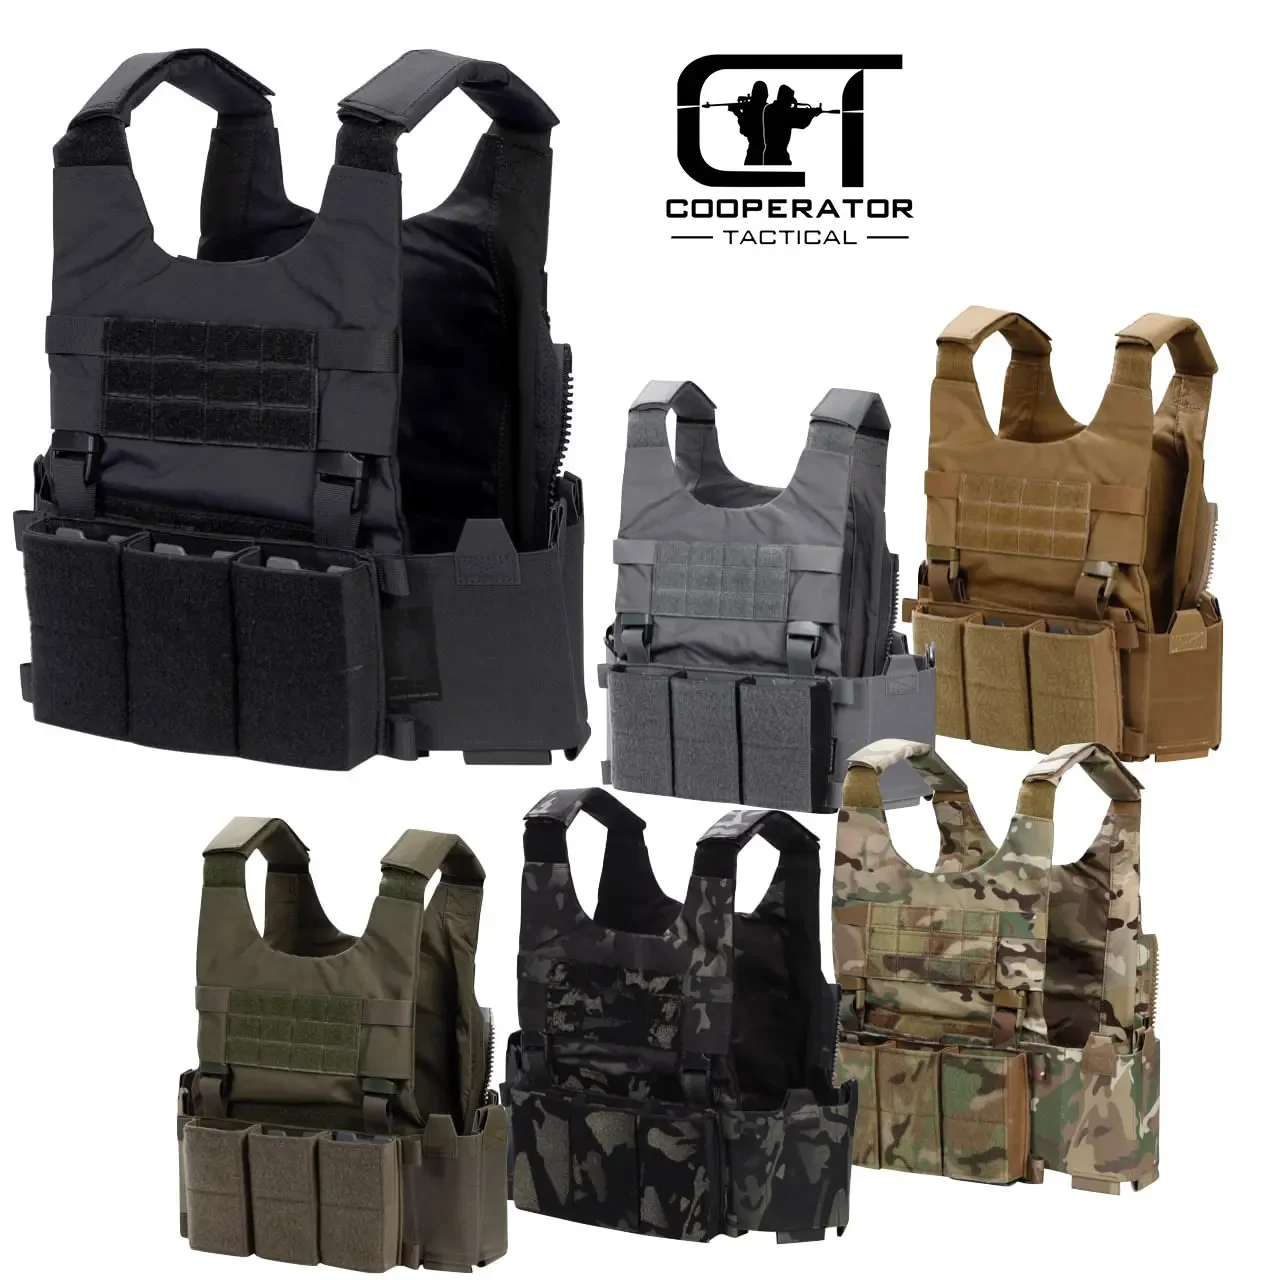 

LV119 Modular Plate Carrier Lightweight 500D Molle Vest with Triple Rifle Mag Placard for Hunting Airsoft Military Tactical Gear